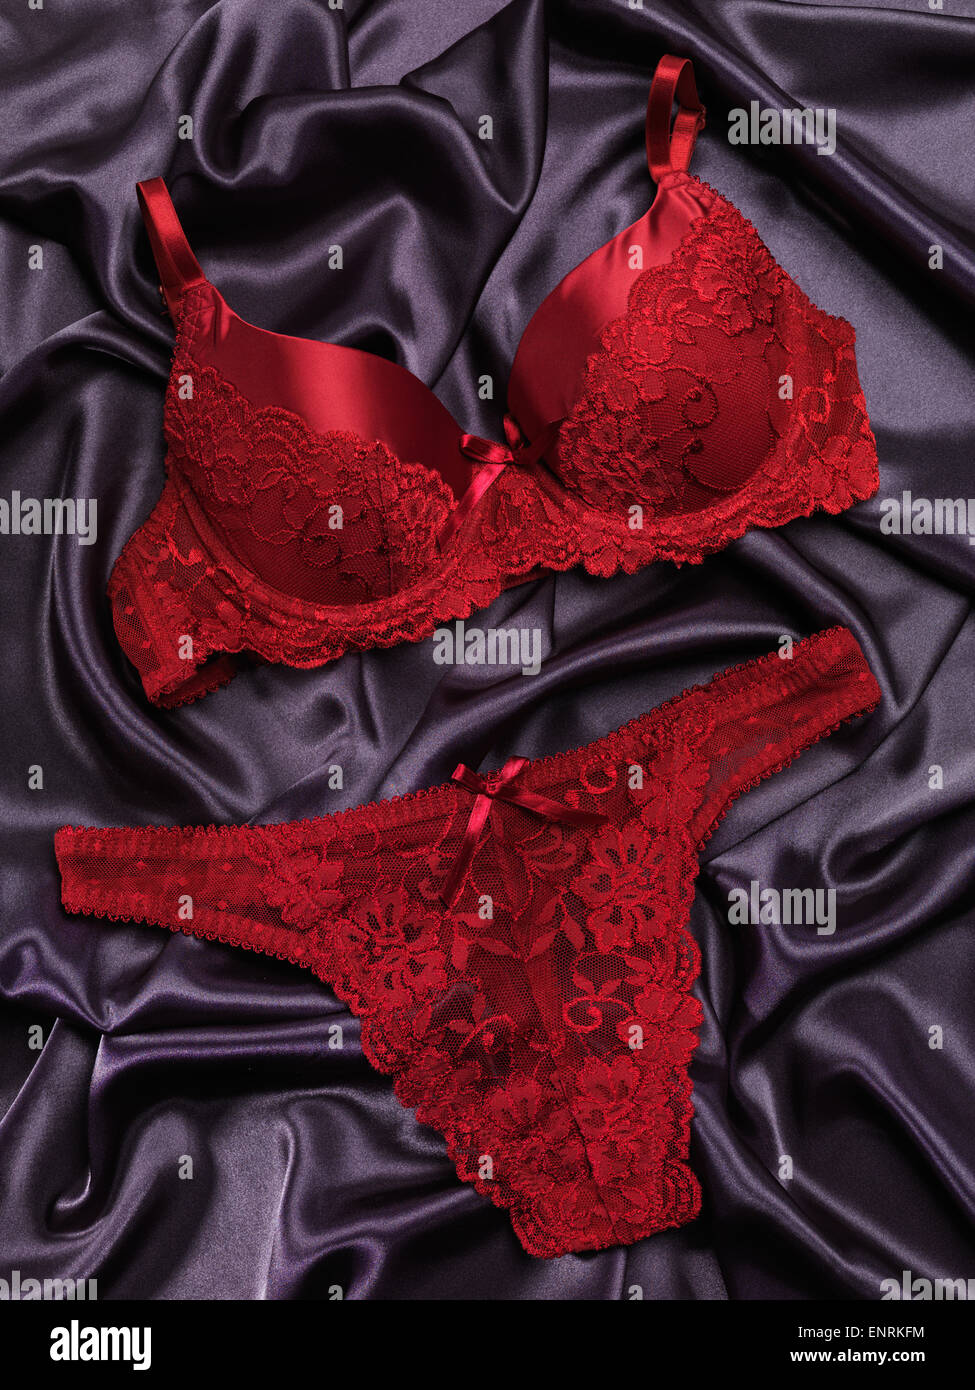 Red lacy lingerie womens underwear on black background Stock Photo